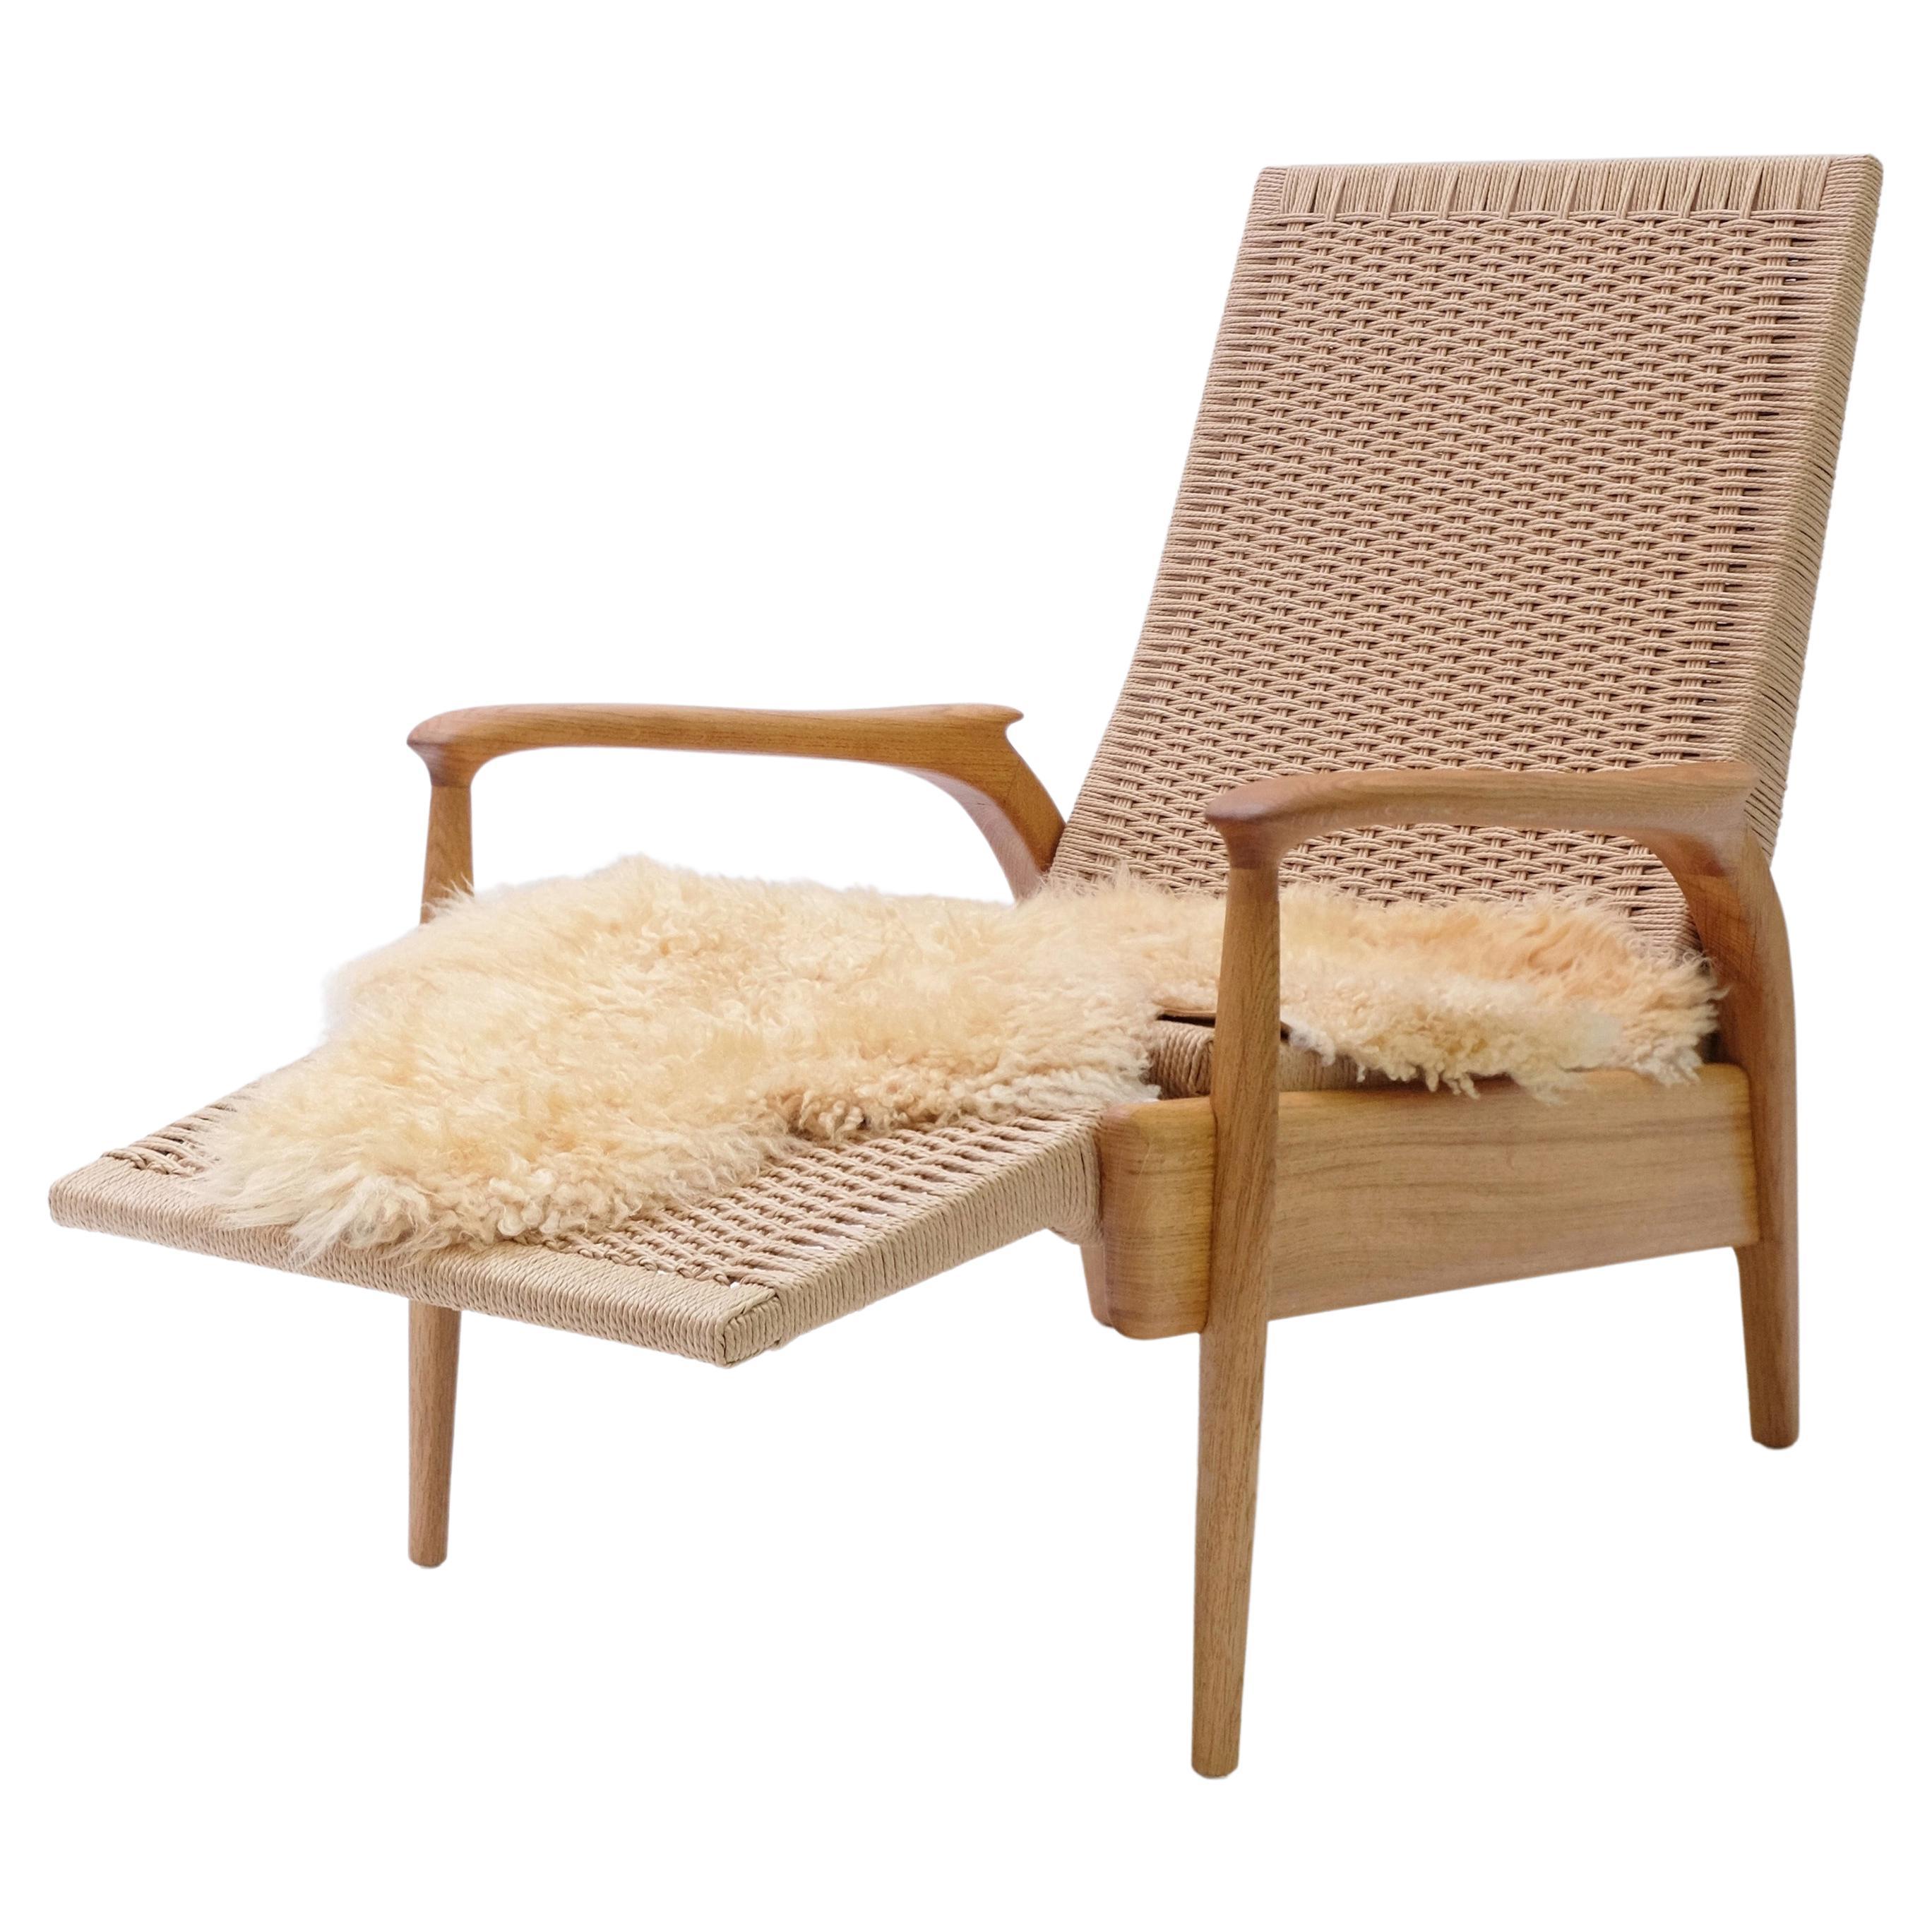 Custom-Made Handwoven Reclining Lounge Chair in Solid Oak& Natural Danish Cord For Sale